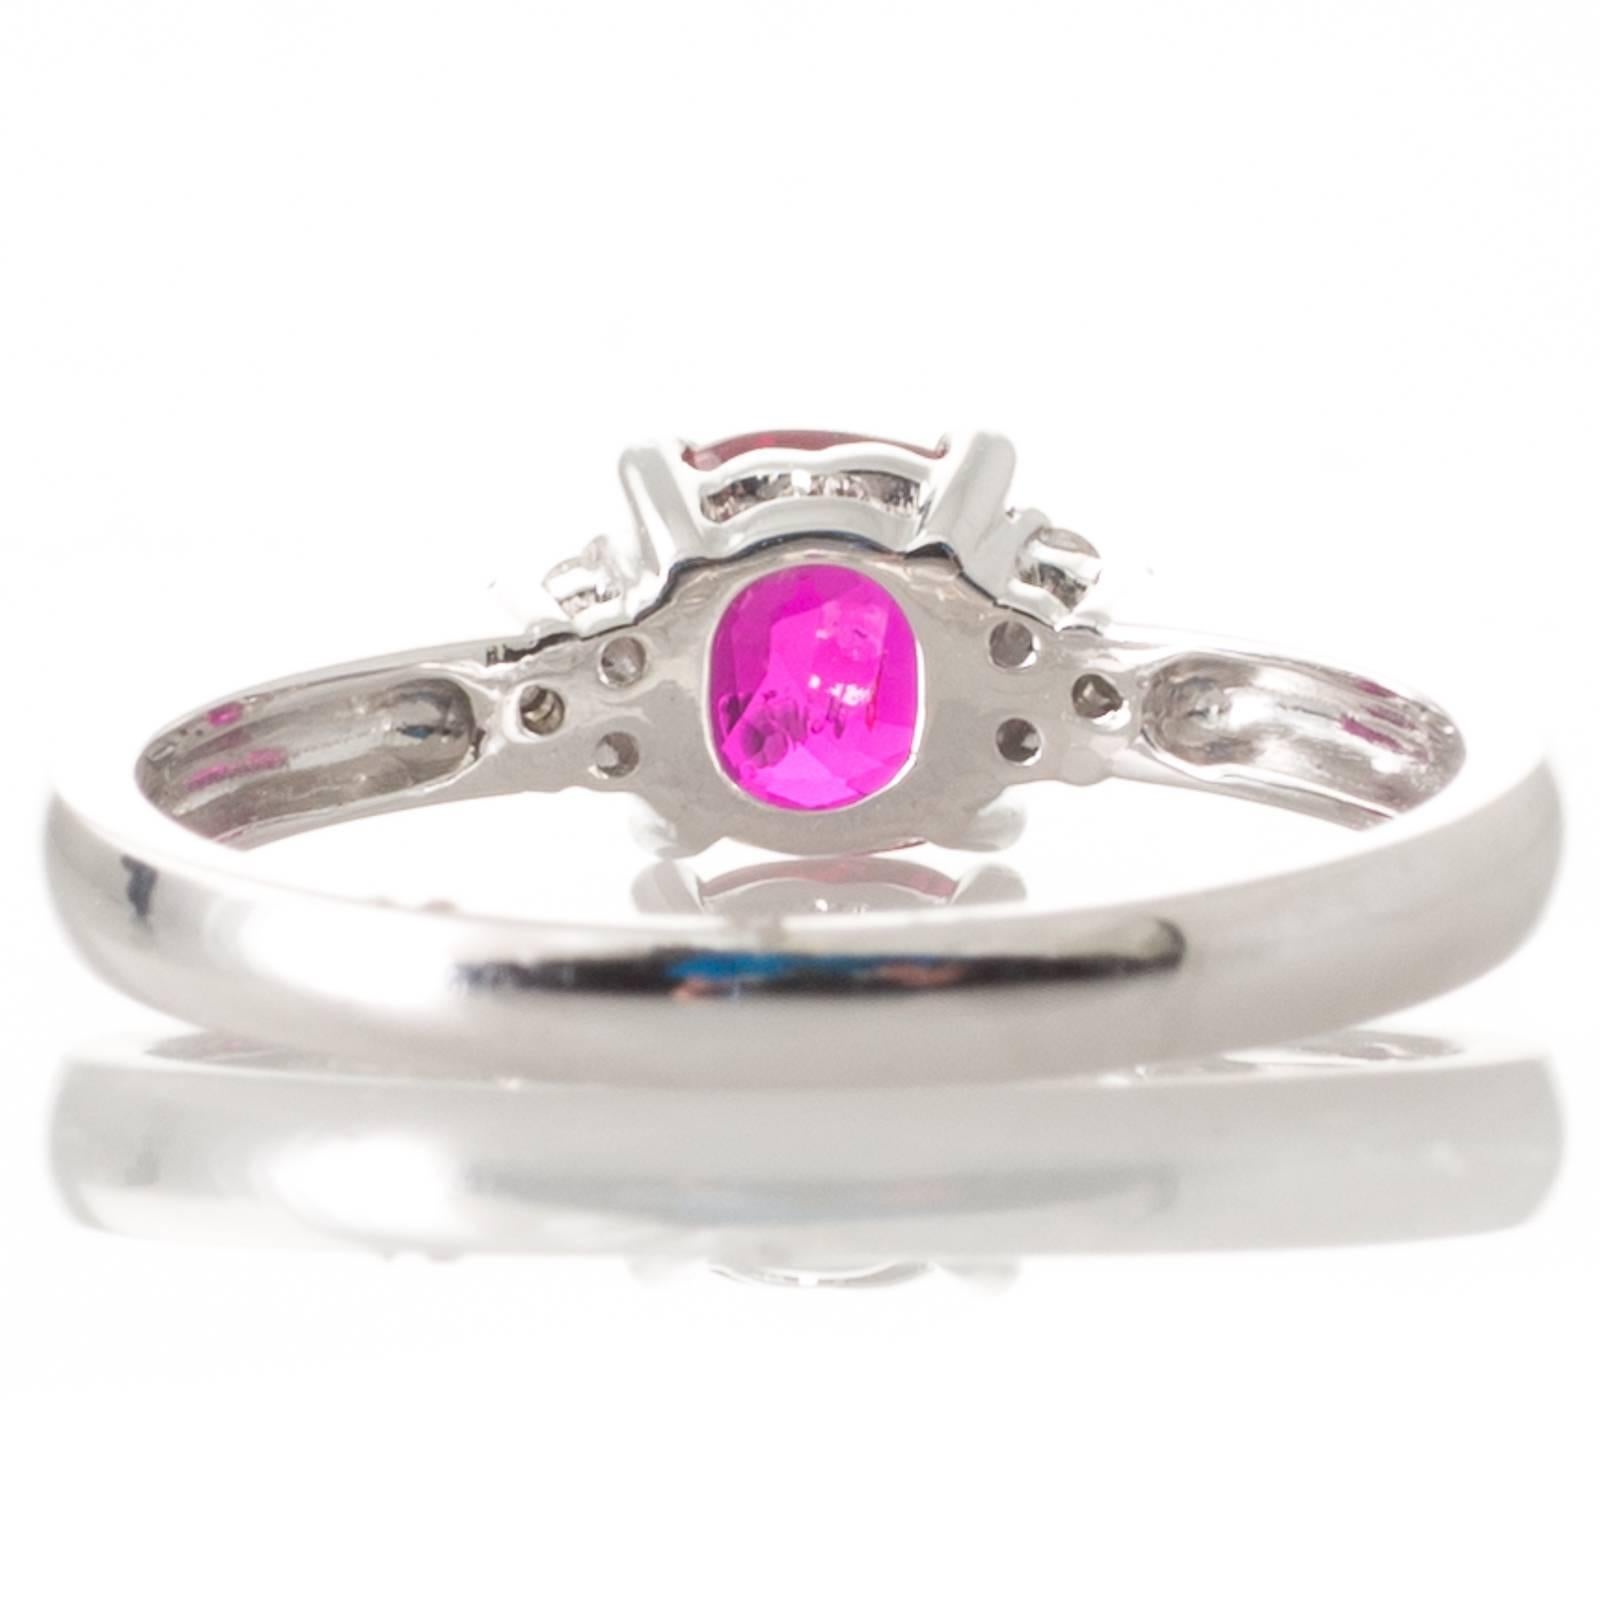 Women's GIA Certified Unheated Mozambique 1.01 Carat Ruby and Diamond Ring